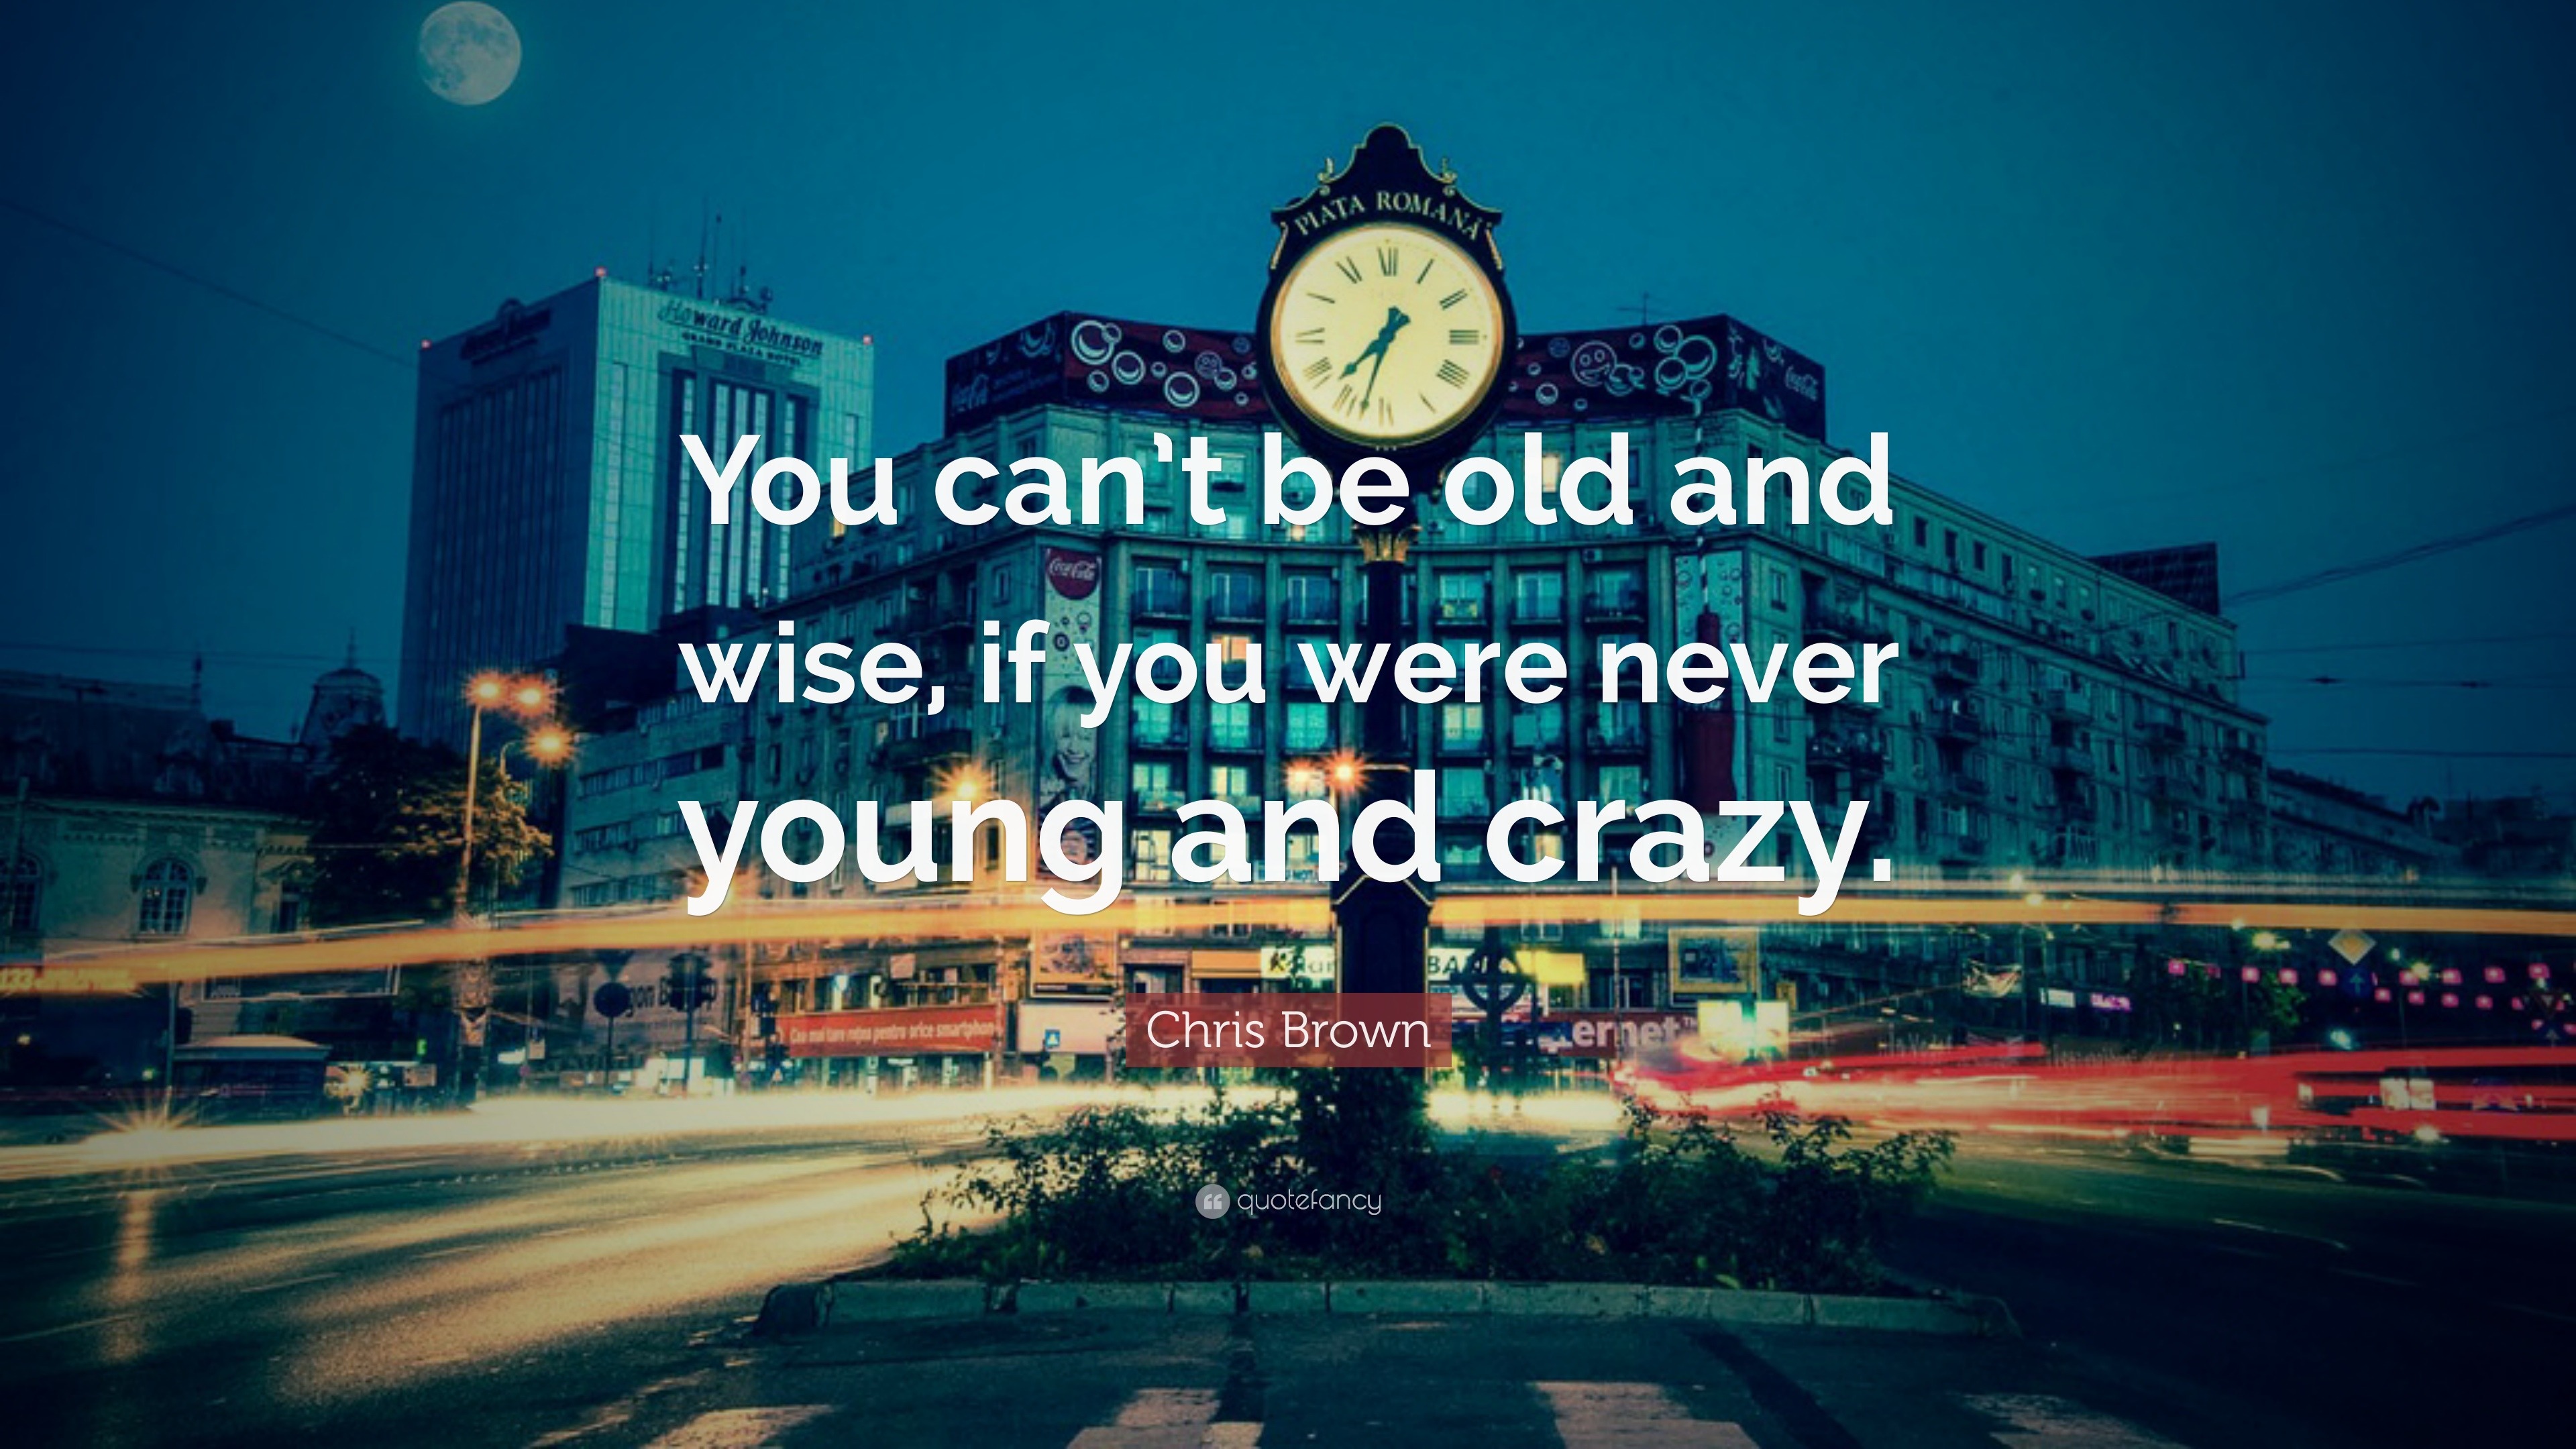 Chris Brown Quote: “You Can't Be Old And Wise, If You Were Never Young And